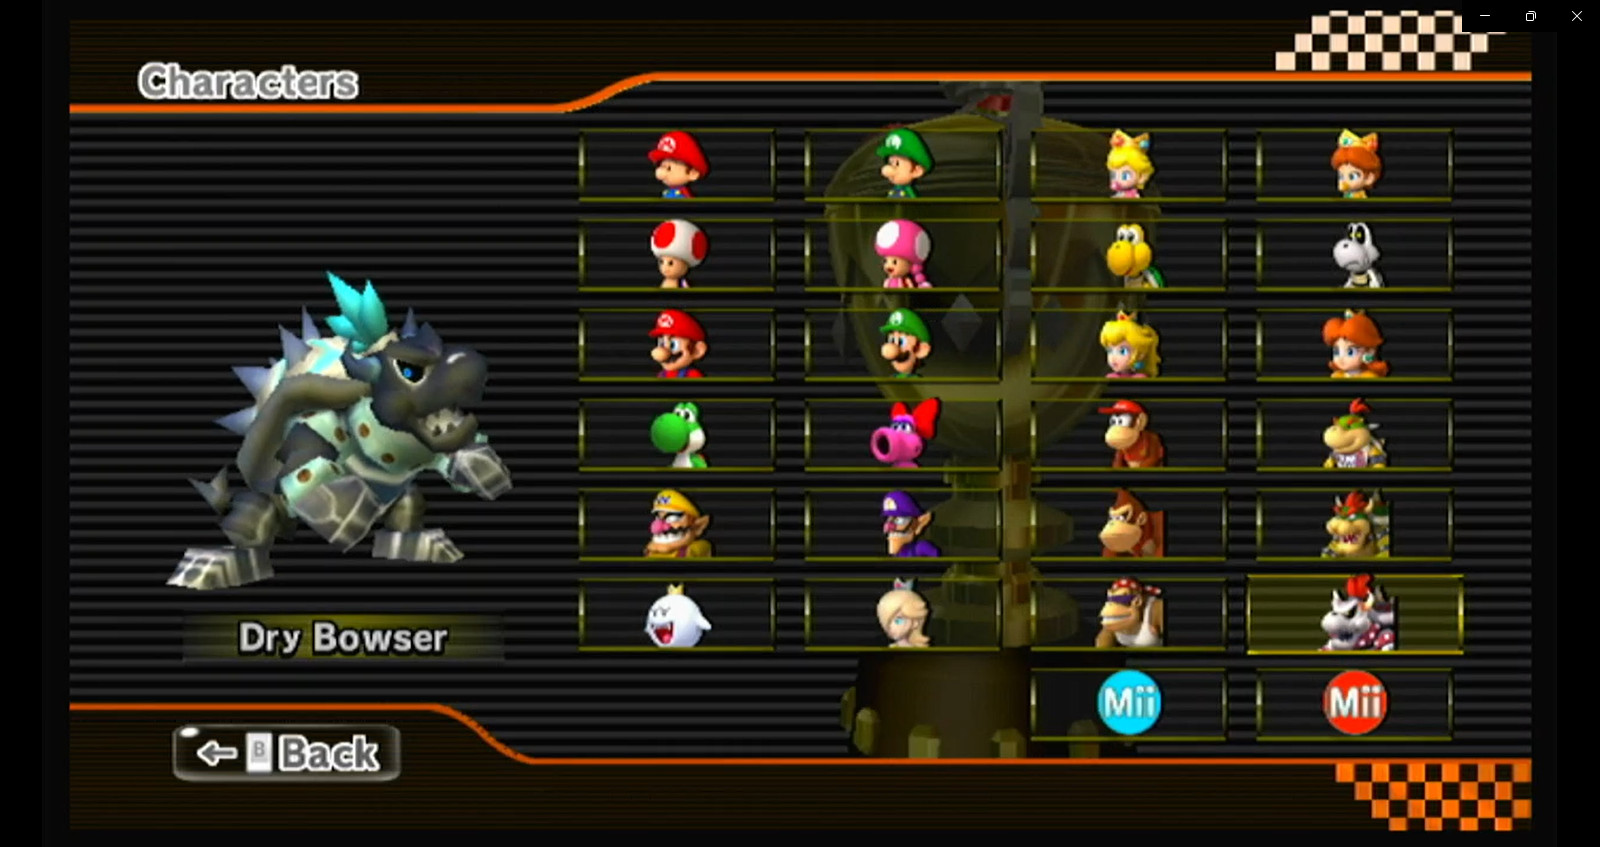 How To Get Dry Bowser In Mario Kart Wii